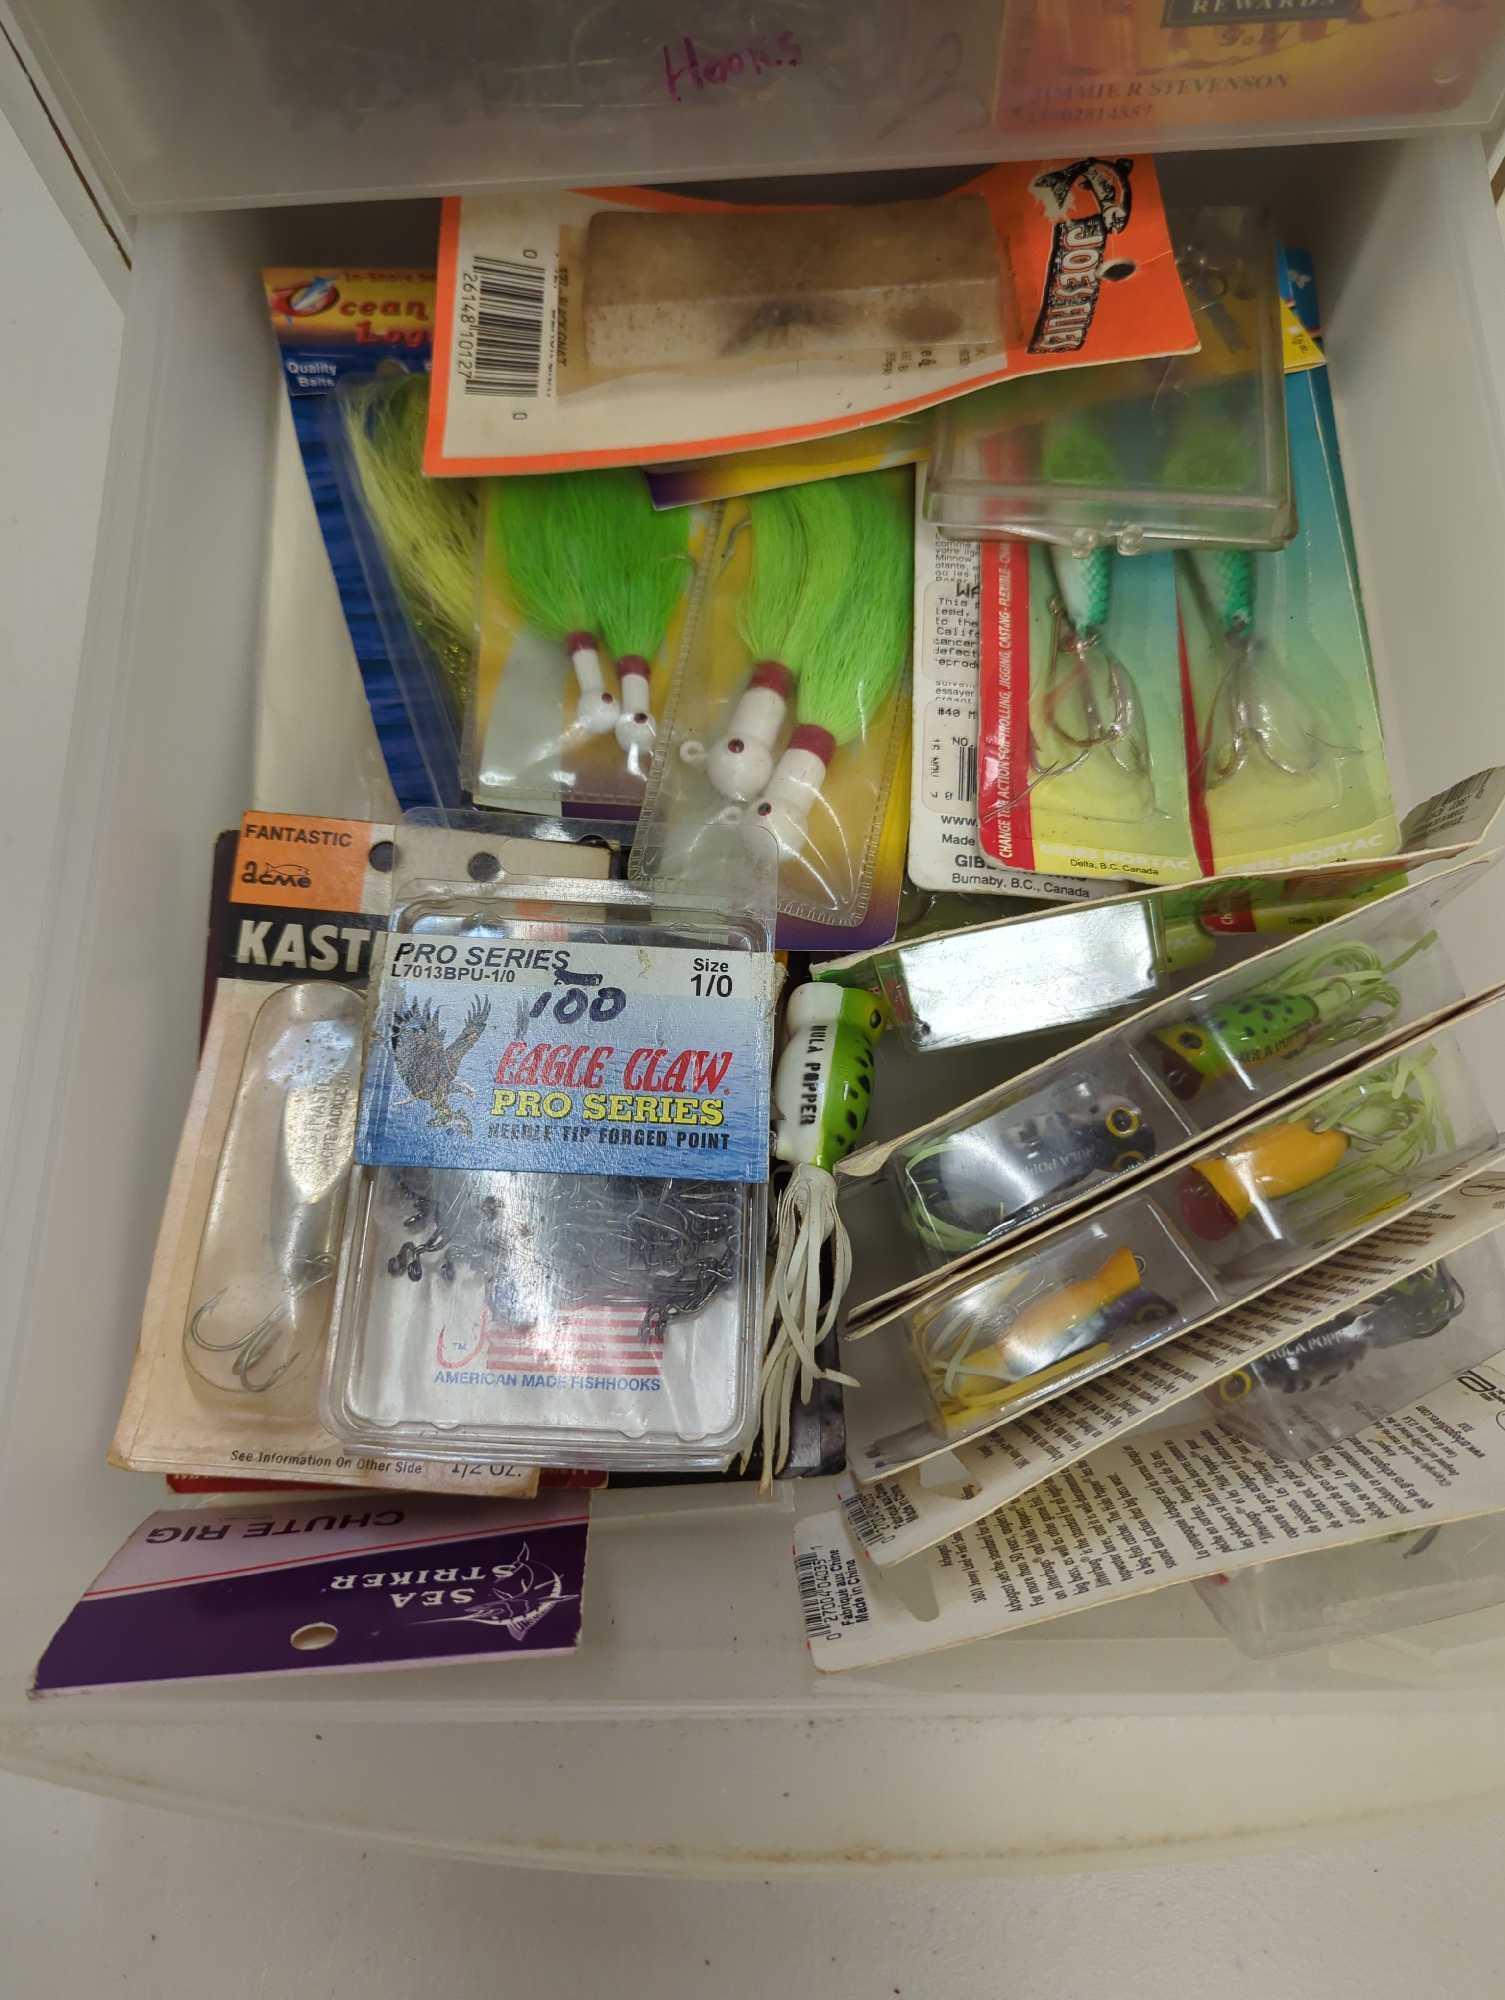 White three drawer organizer filled with unopened fishing lures and other accessories. Comes as is